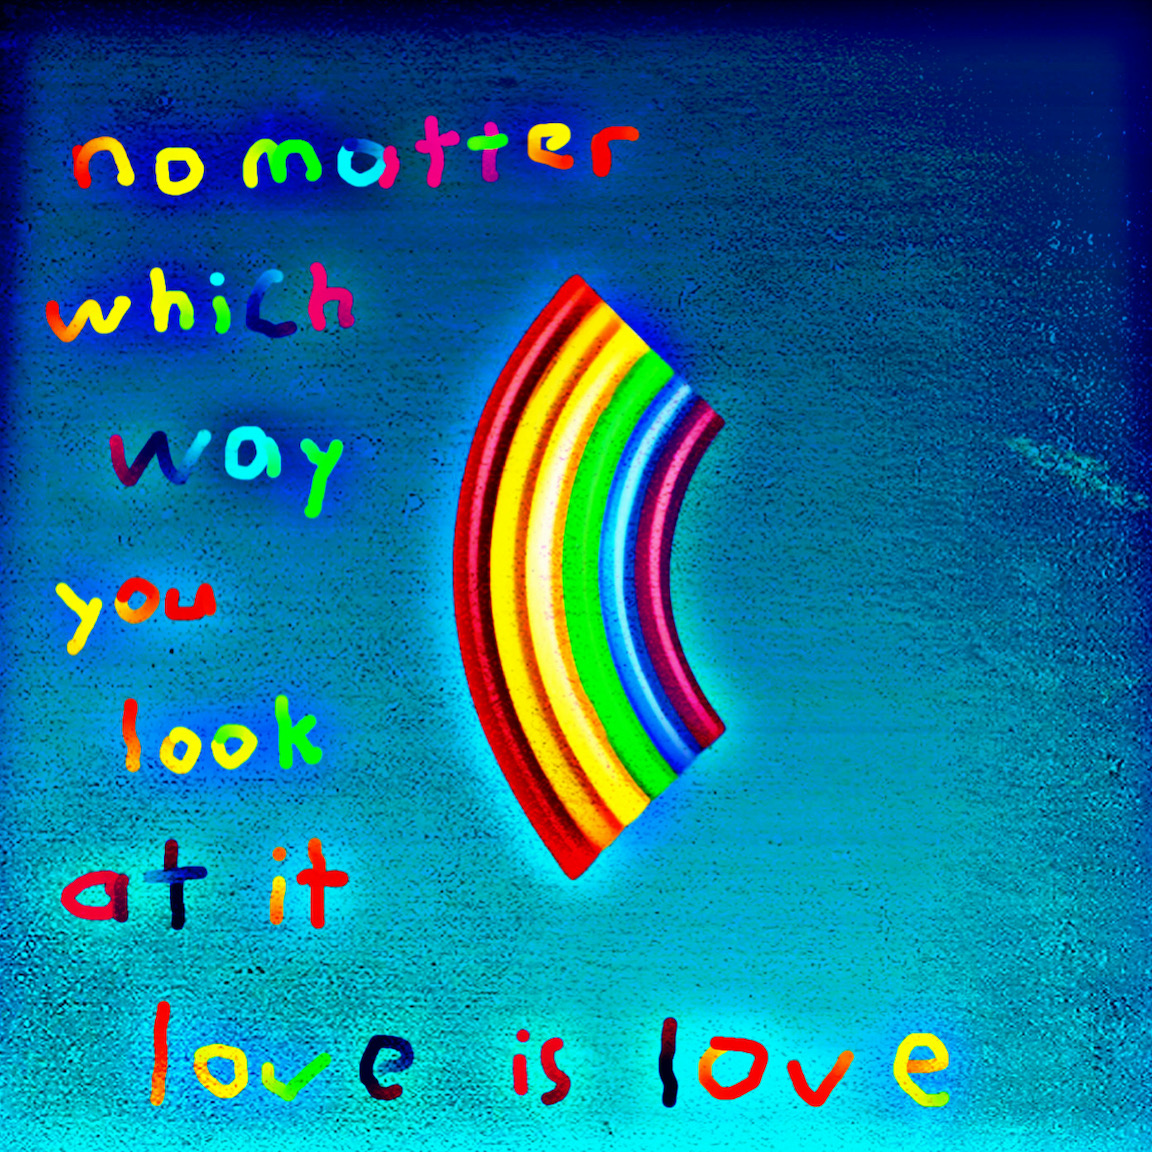 Alex Echo - 'No Matter Which Way You Look At, Love Is Love' -  Framed Limited Edition